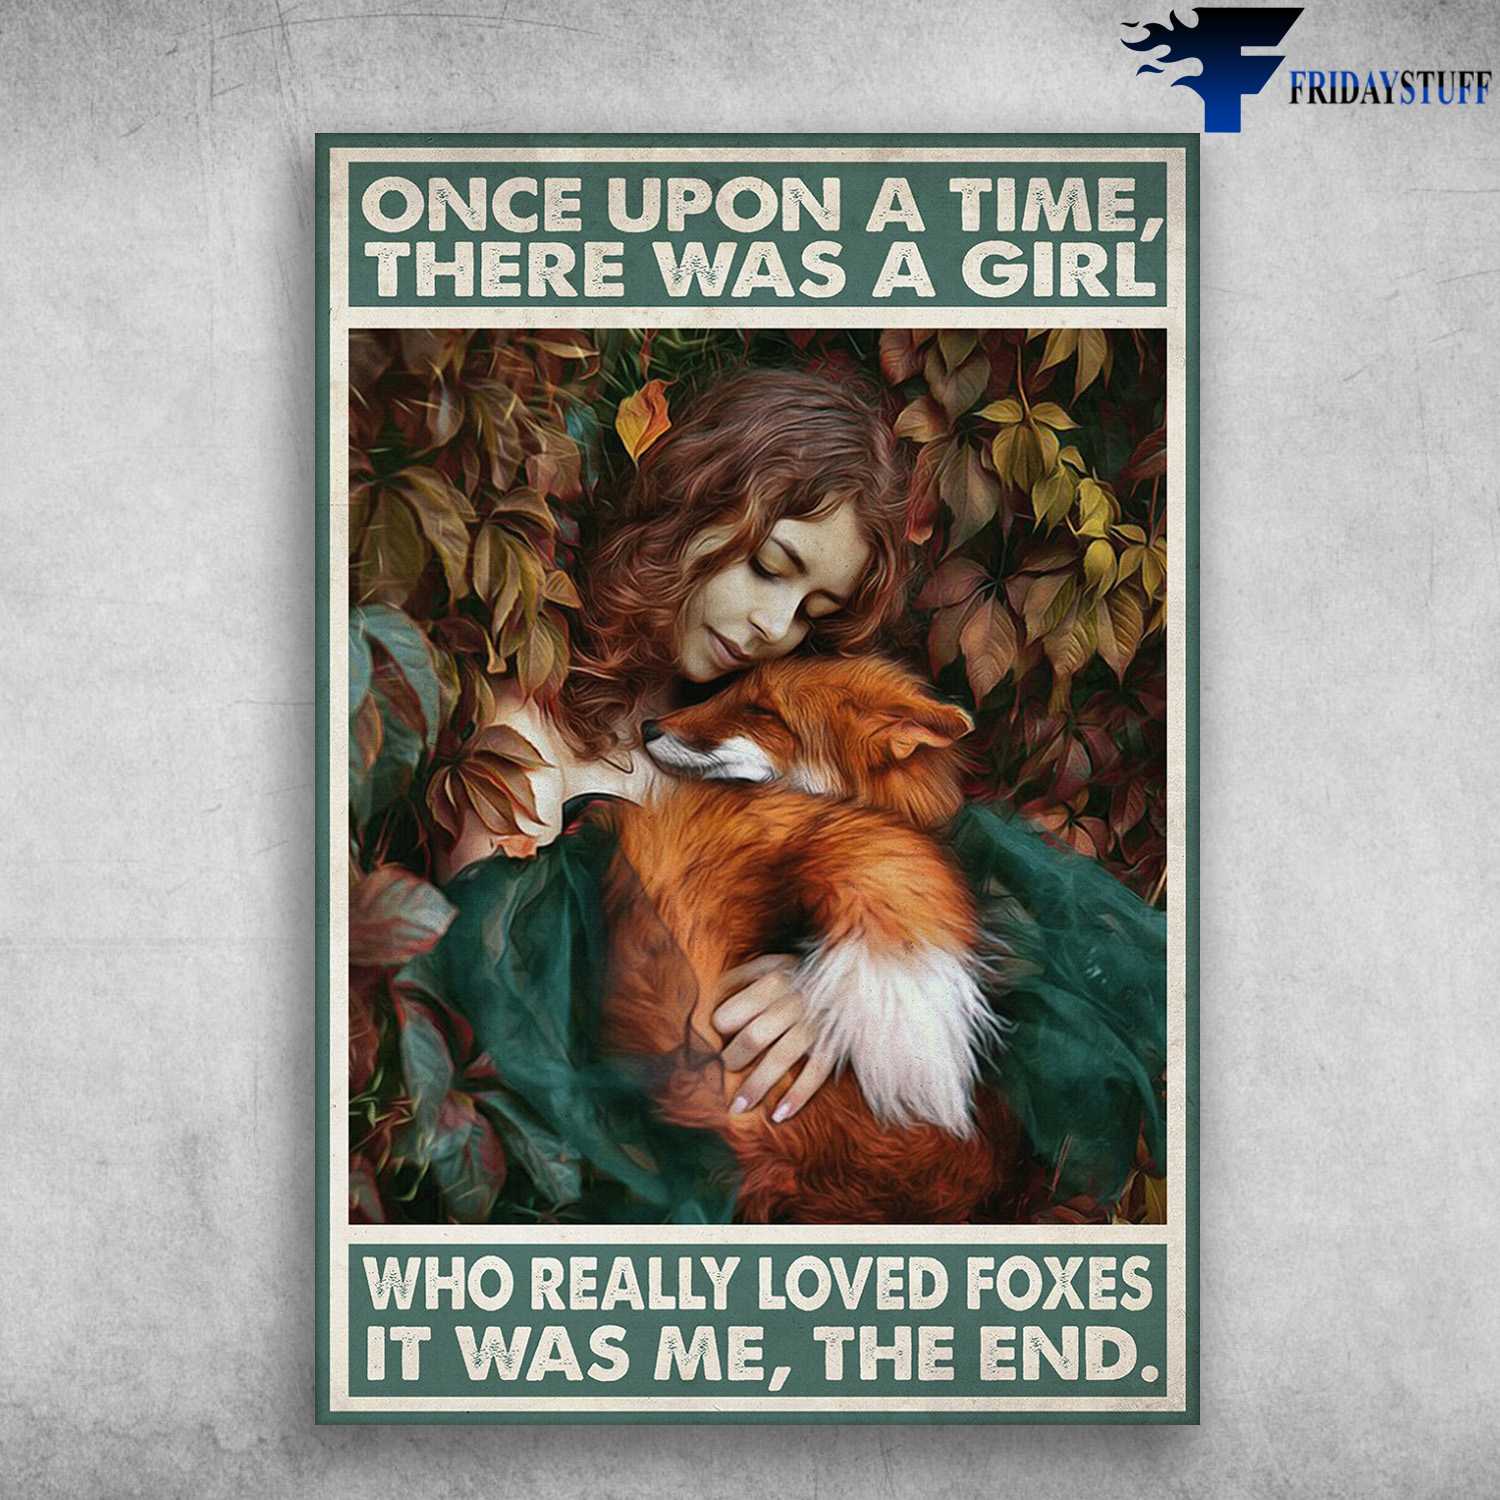 Girl Loves Fox - Once Upon A Time, There Was A Girl, Who Really Loved Foxes, It Was Me, The End